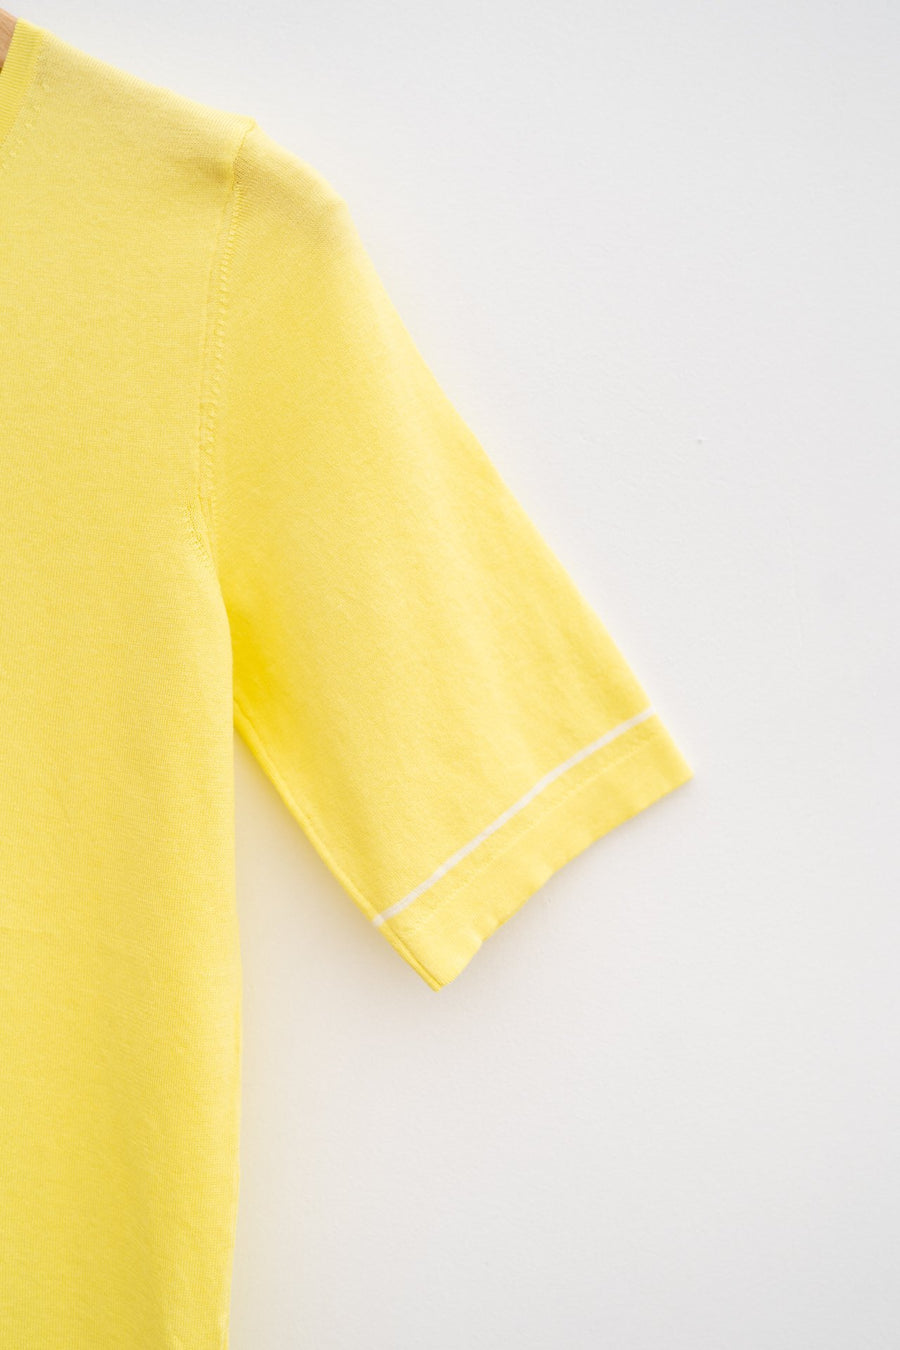 Janes - Short Sleeve T-shirt Yellow - Janes Knitwear with a twist